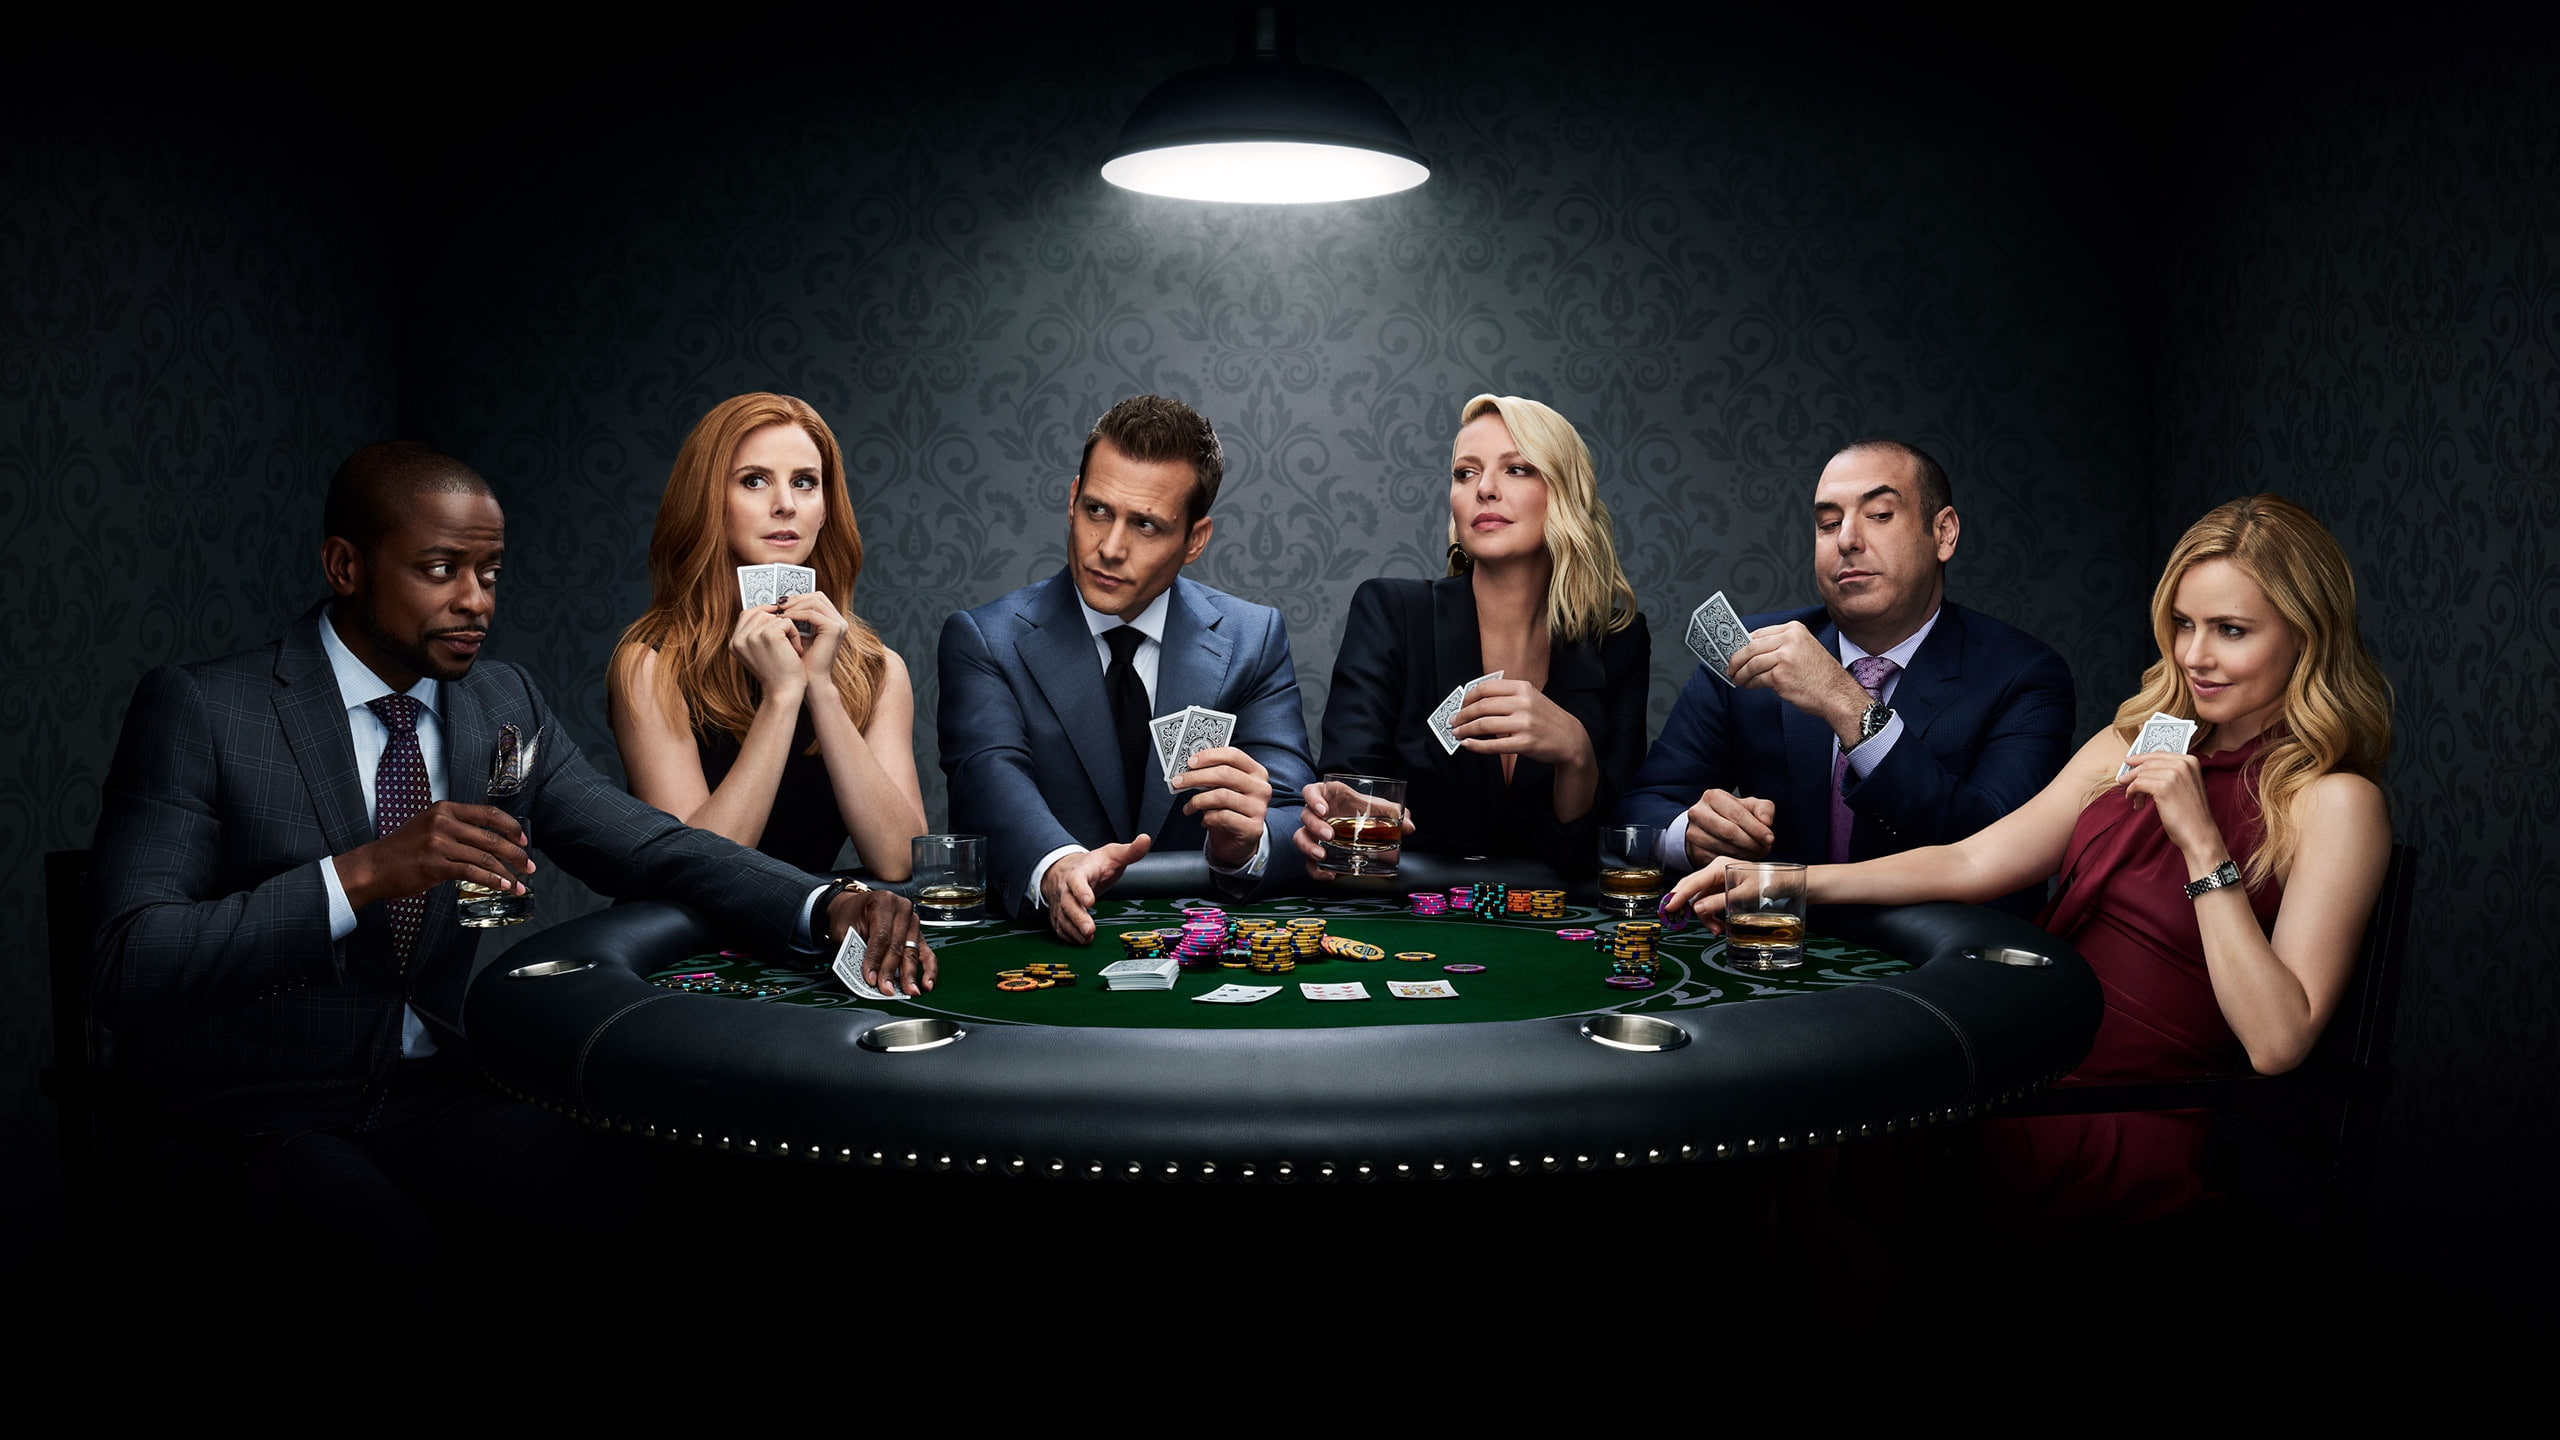 actors, the series, Movies, Suits, Force majeure, playing cards